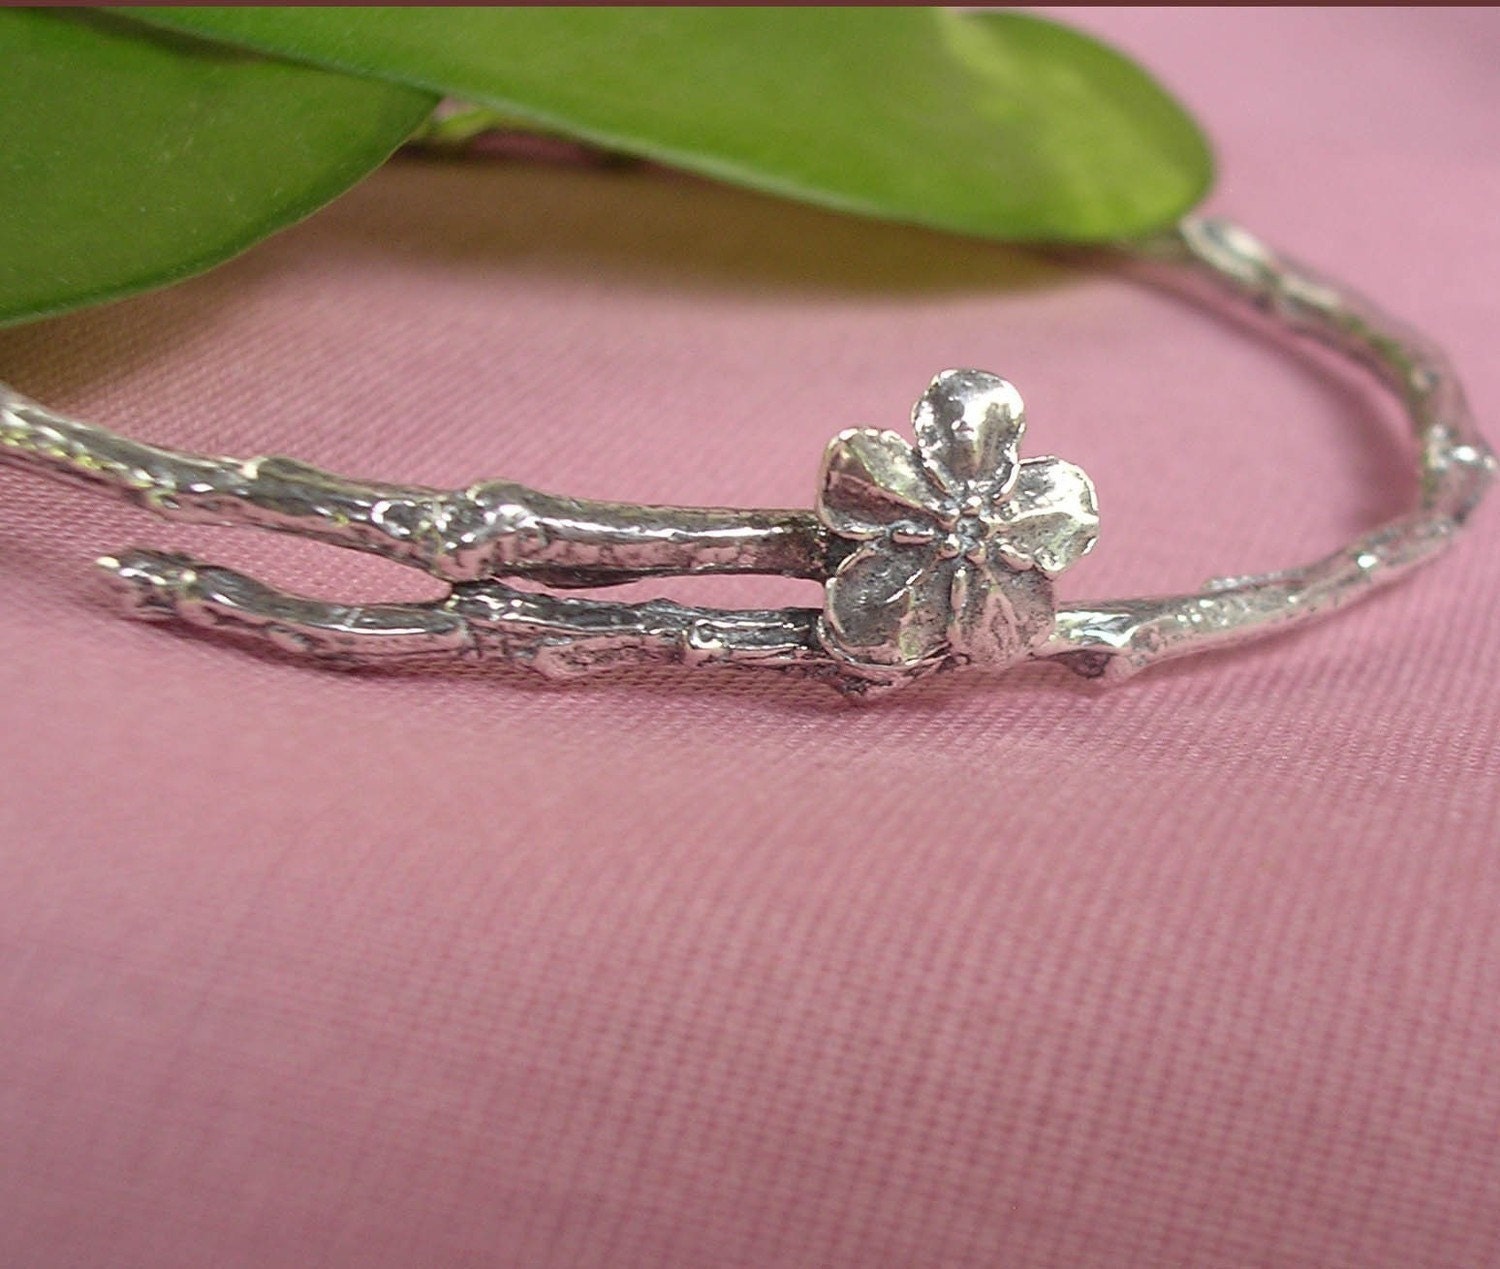 Bangle Bracelet, sterling silver, nature jewelry, wildflower, twig, Forget Me Not standard size